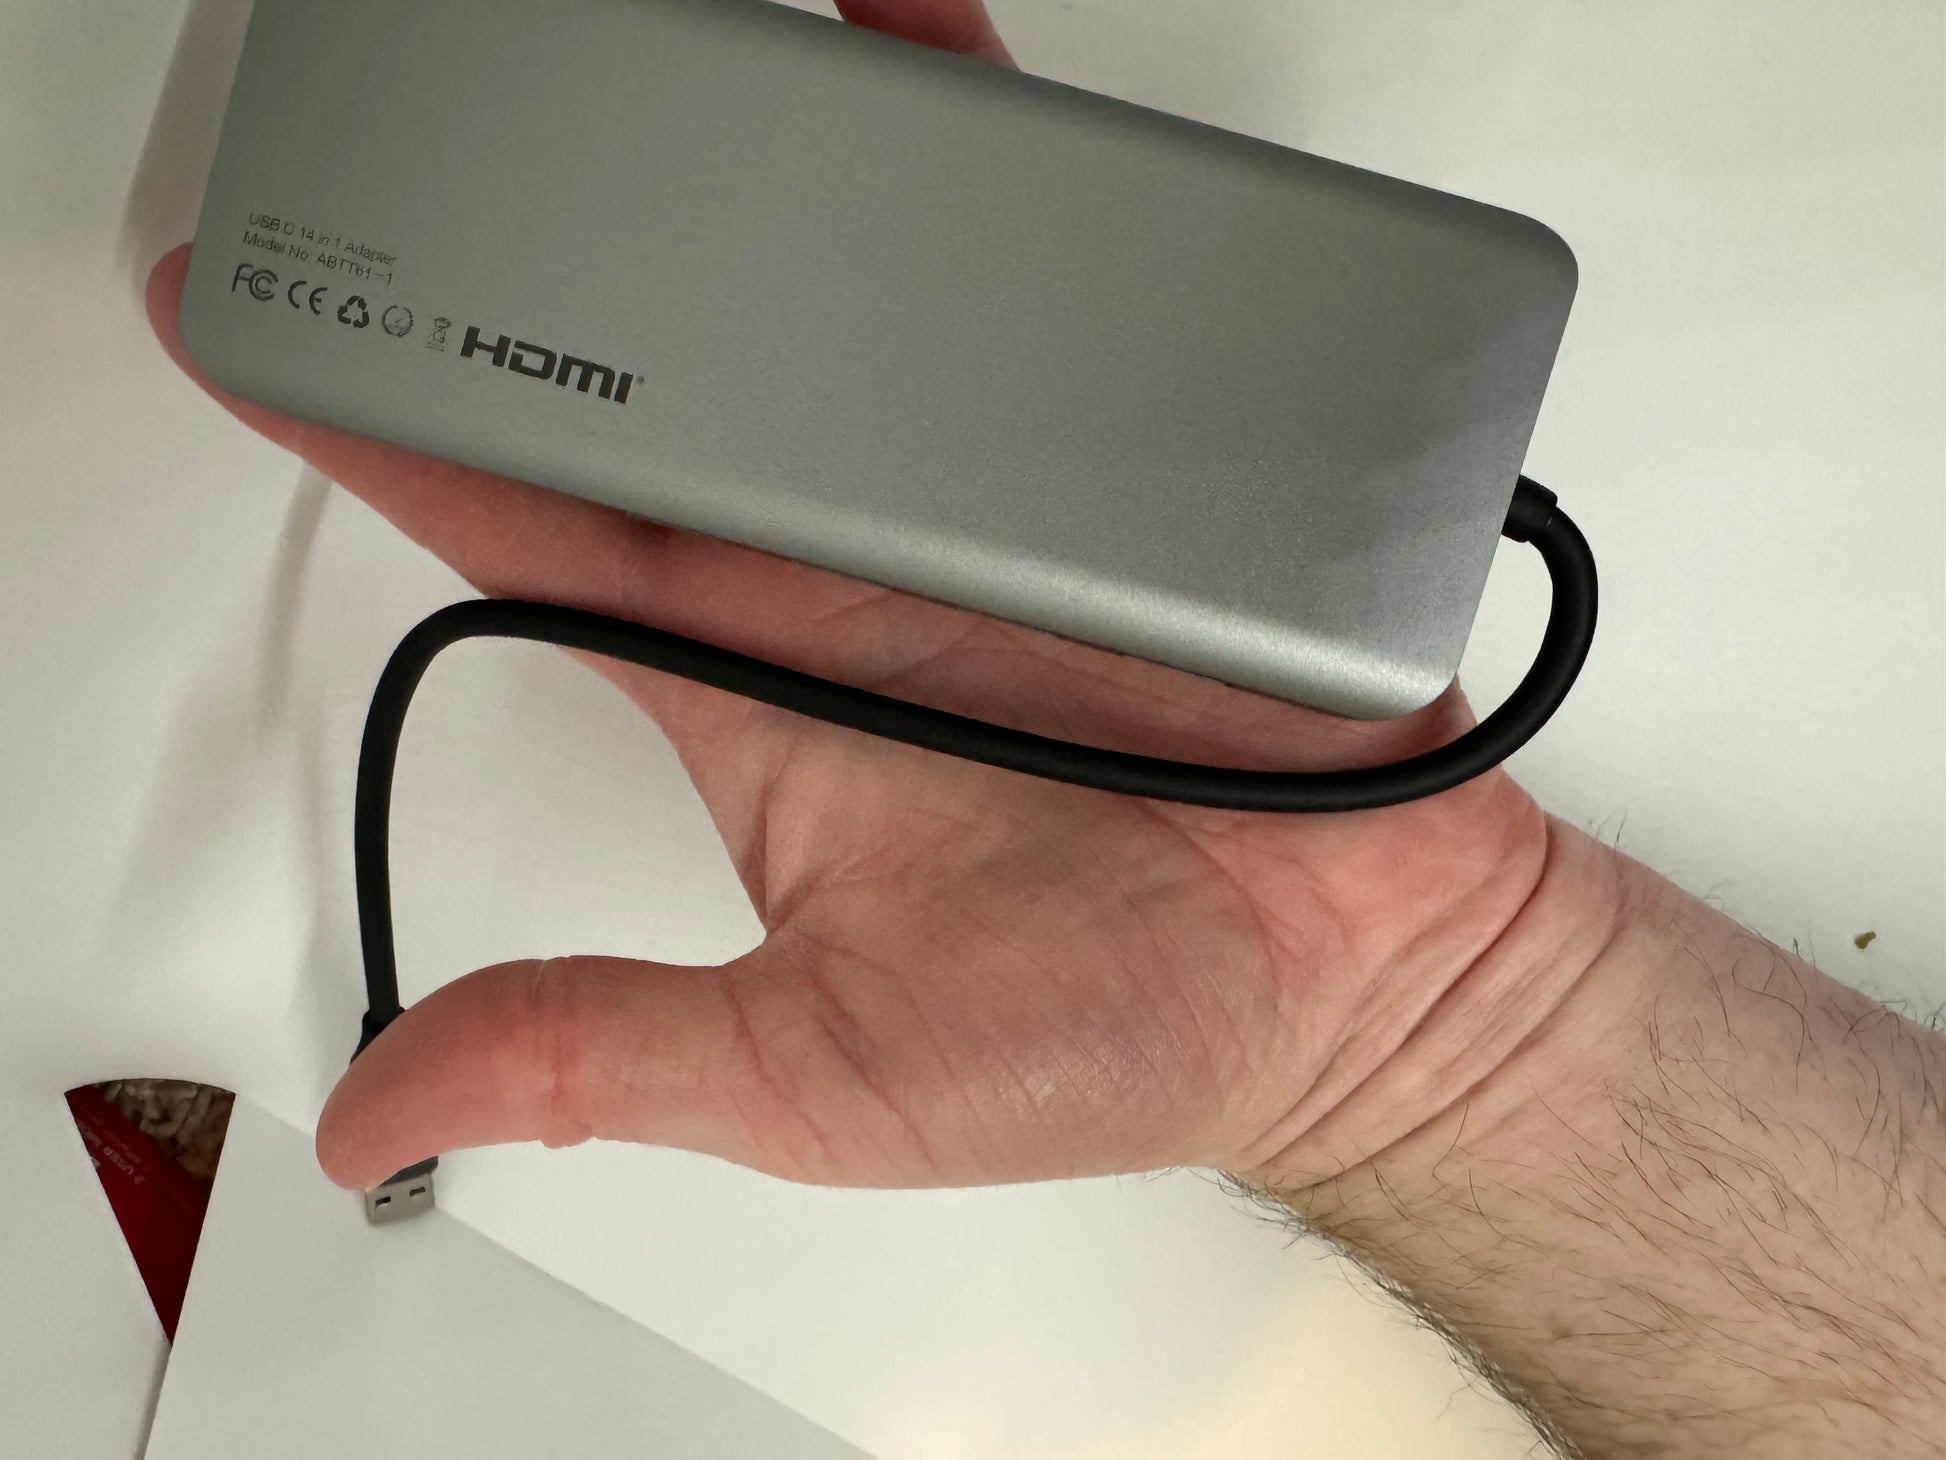 The picture shows a hand holding a rectangular device that appears to be made of metal with a matte finish. The device is silver in color and has a cable attached to it. The cable is black and has a USB connector at the end. On the device, there is text that reads "USB 3.0 to HDMI Adapter" and "Model No: ABT01F". There are also various symbols including "FC", "CE", and the HDMI logo. The background is white and there is a small red object in the bottom left corner. The hand holding the device appe